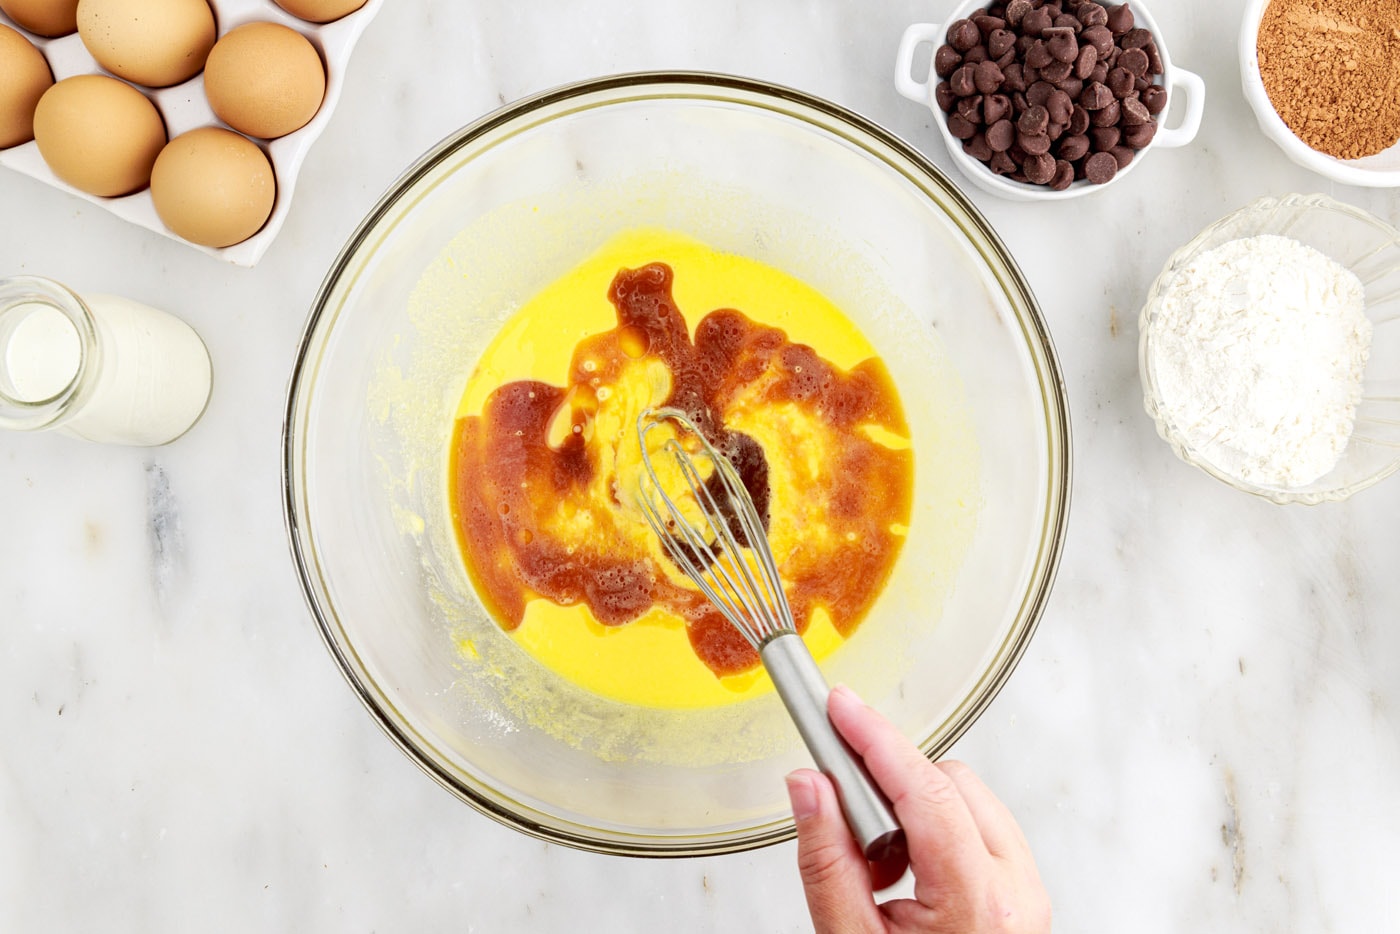 whisking vanilla, egg yolks, and oil in a bowl